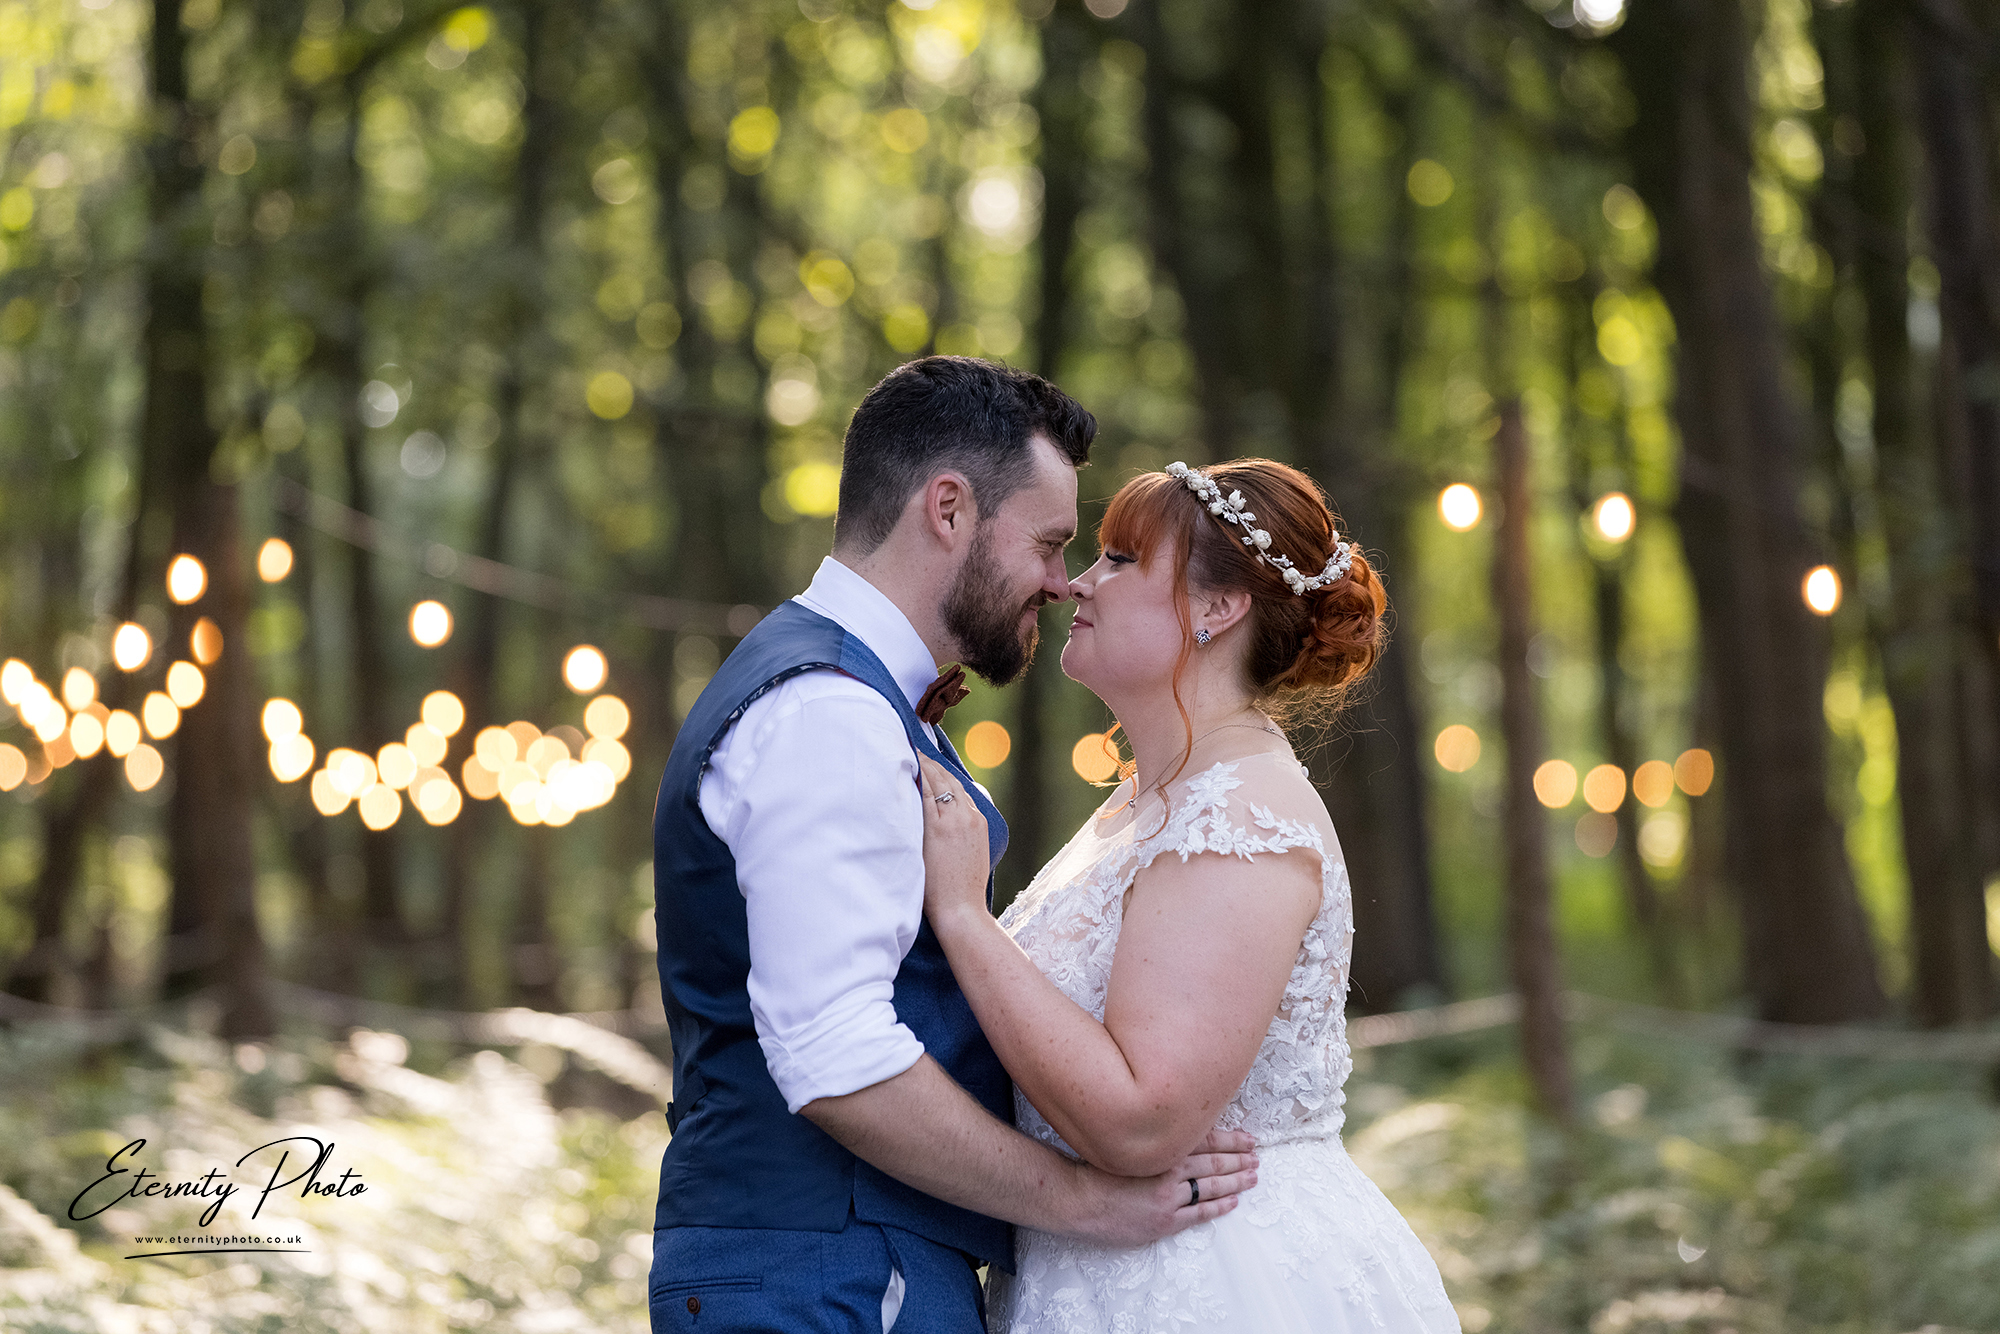 Bride and groom embracing in forest wedding